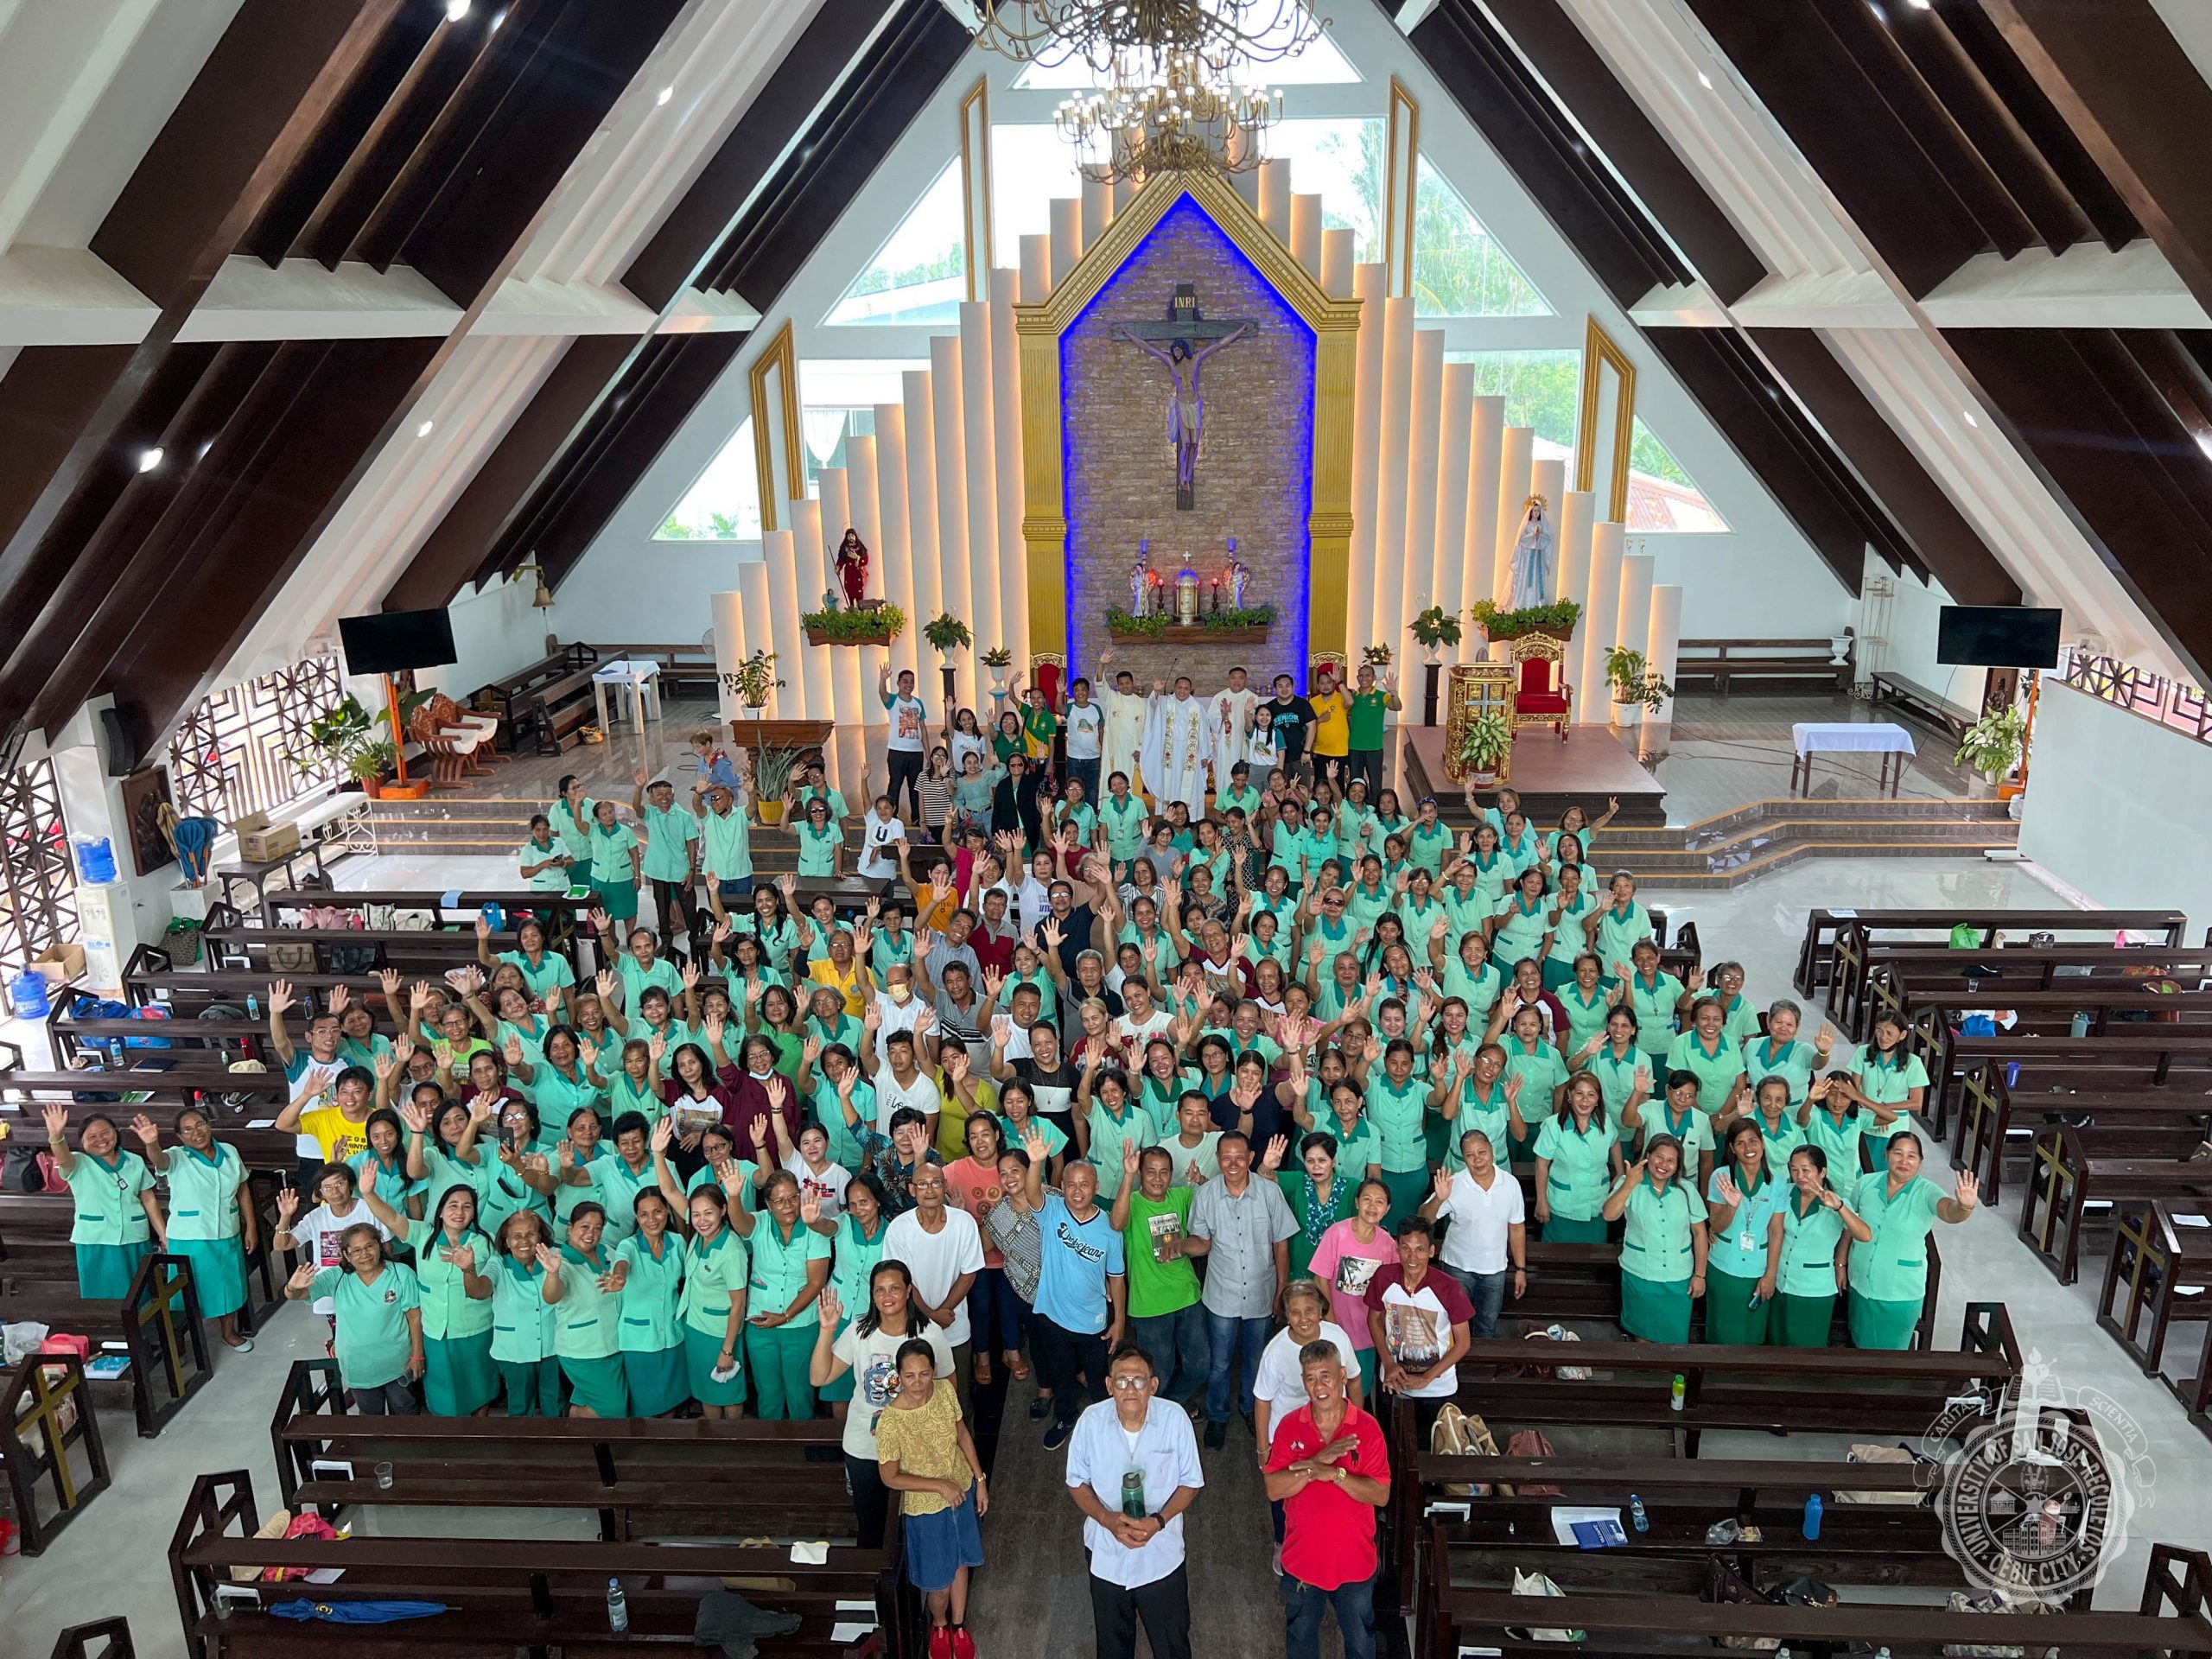 USJ-R trains catechists from 16 parishes in Northern Cebu